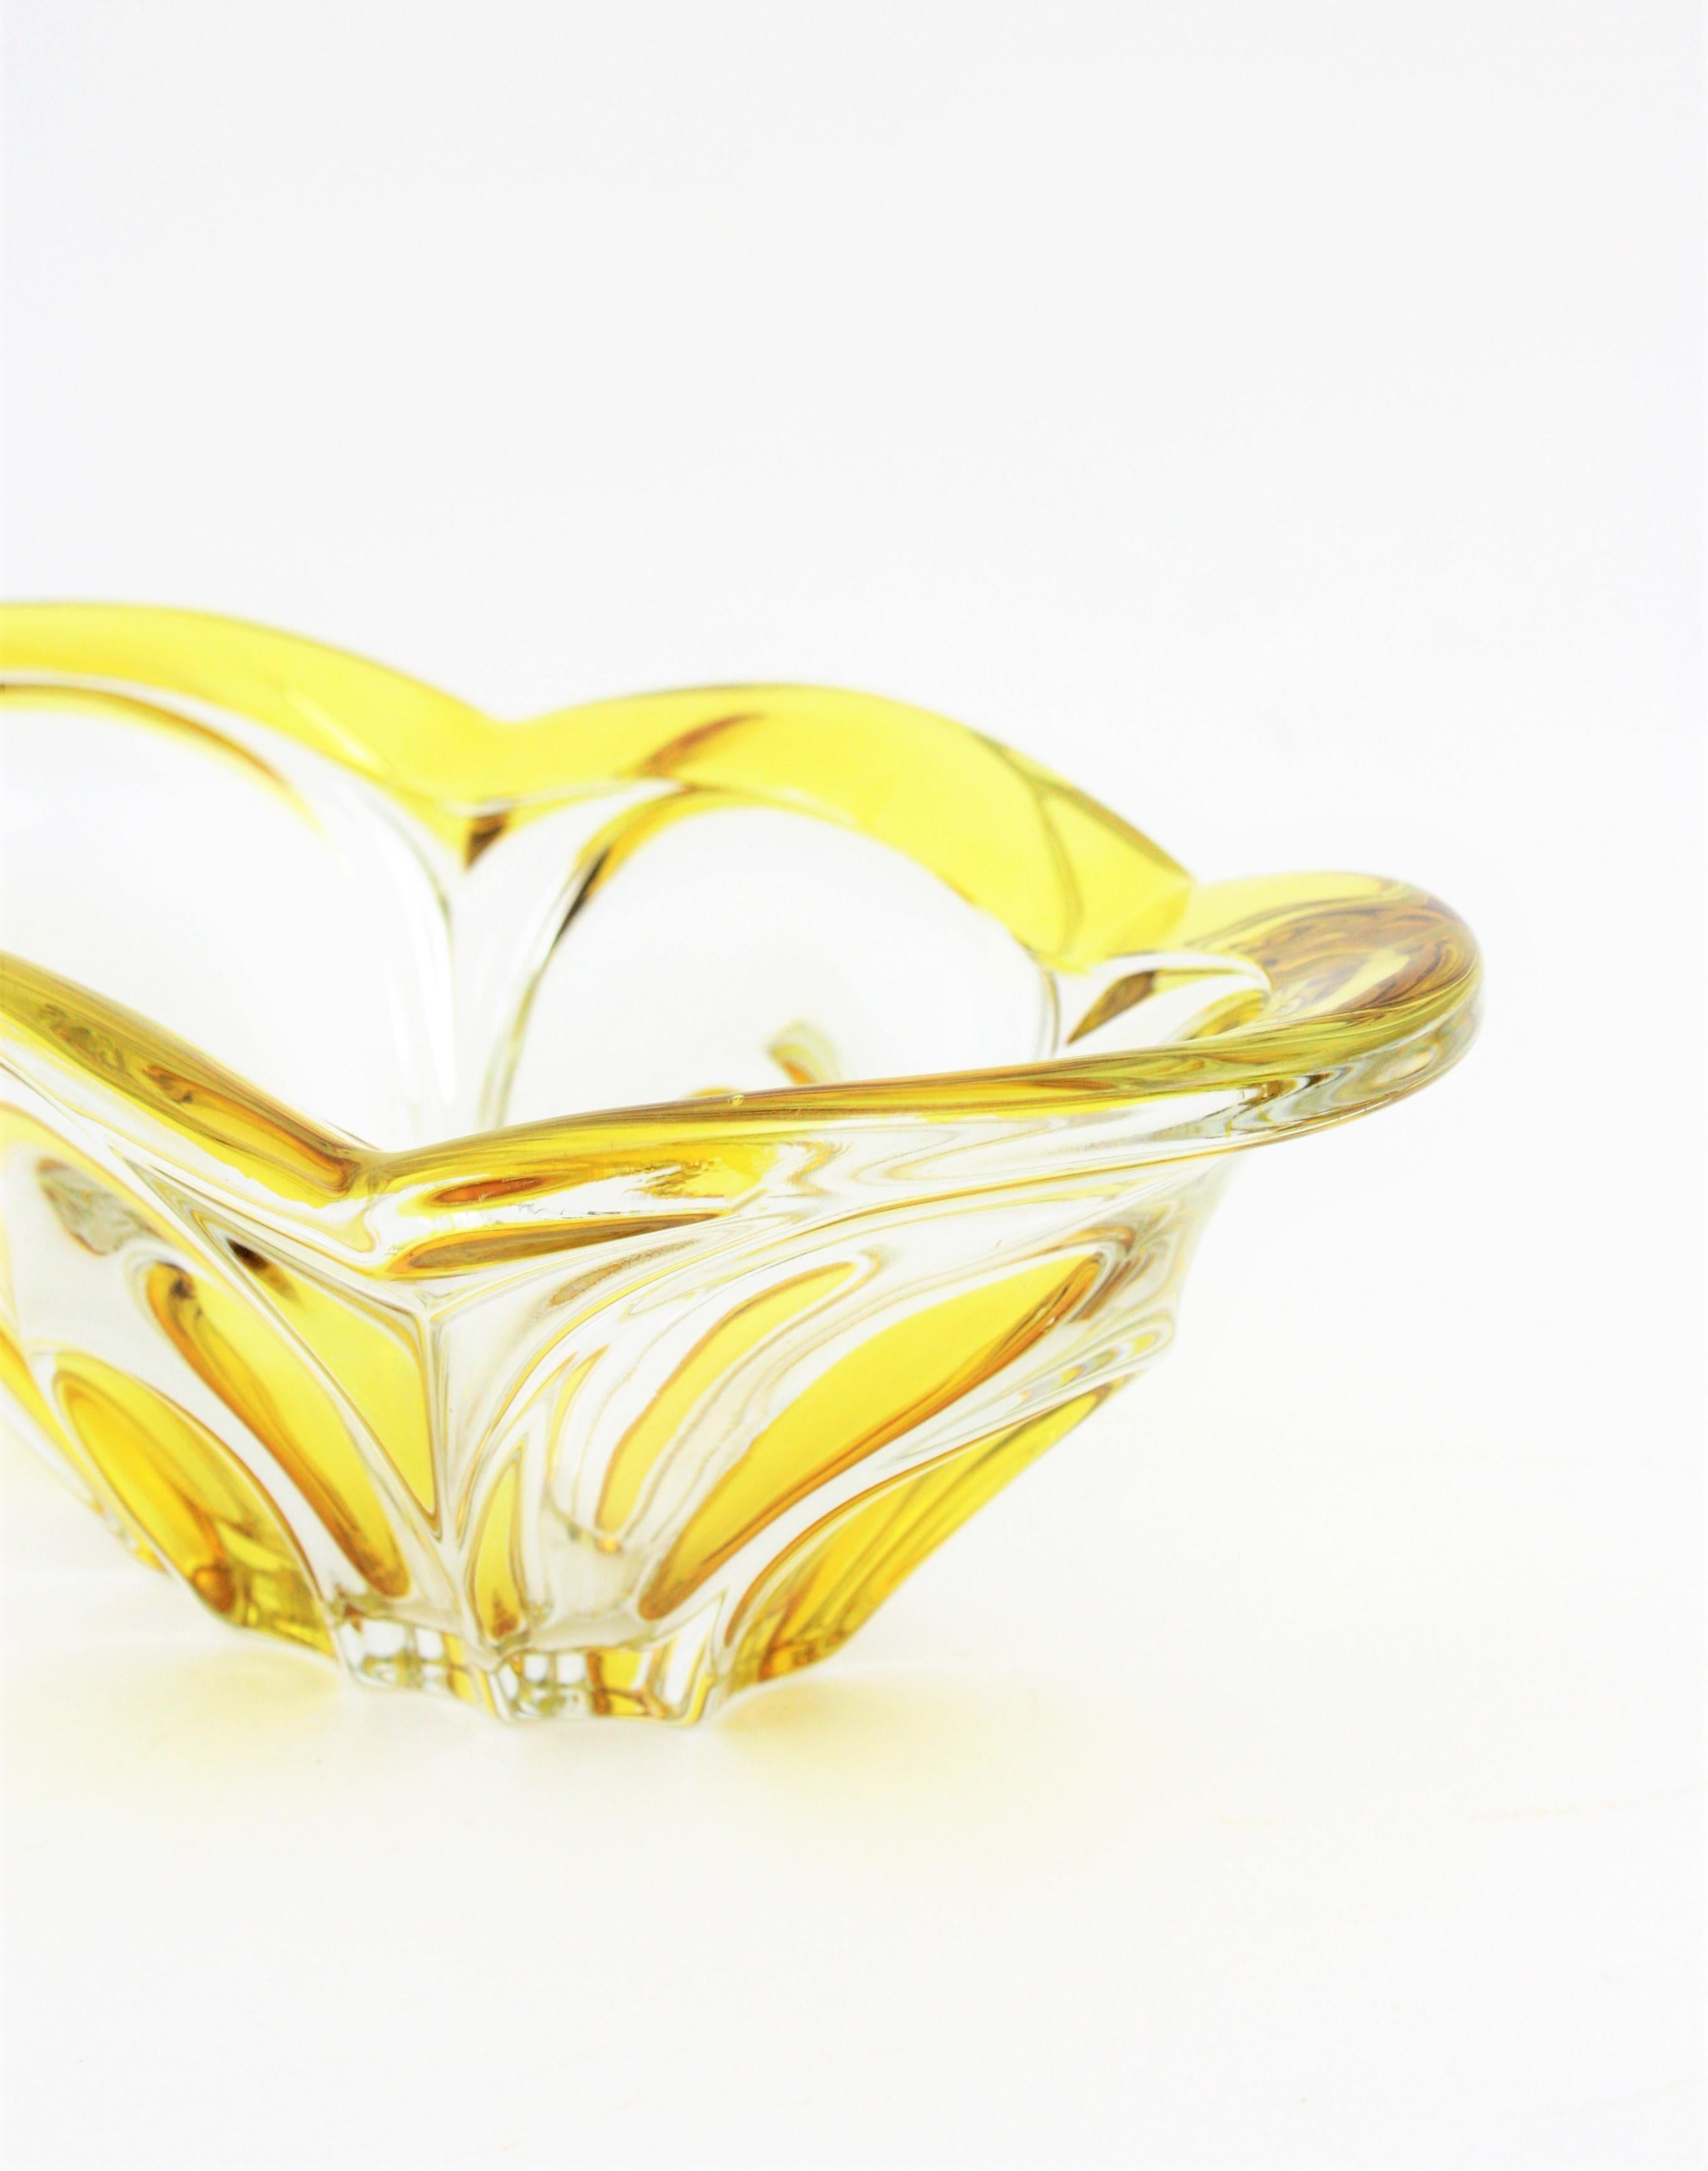 Italian 1950s Scalloped Sommerso Yellow and Clear Murano Glass Centrepiece 1